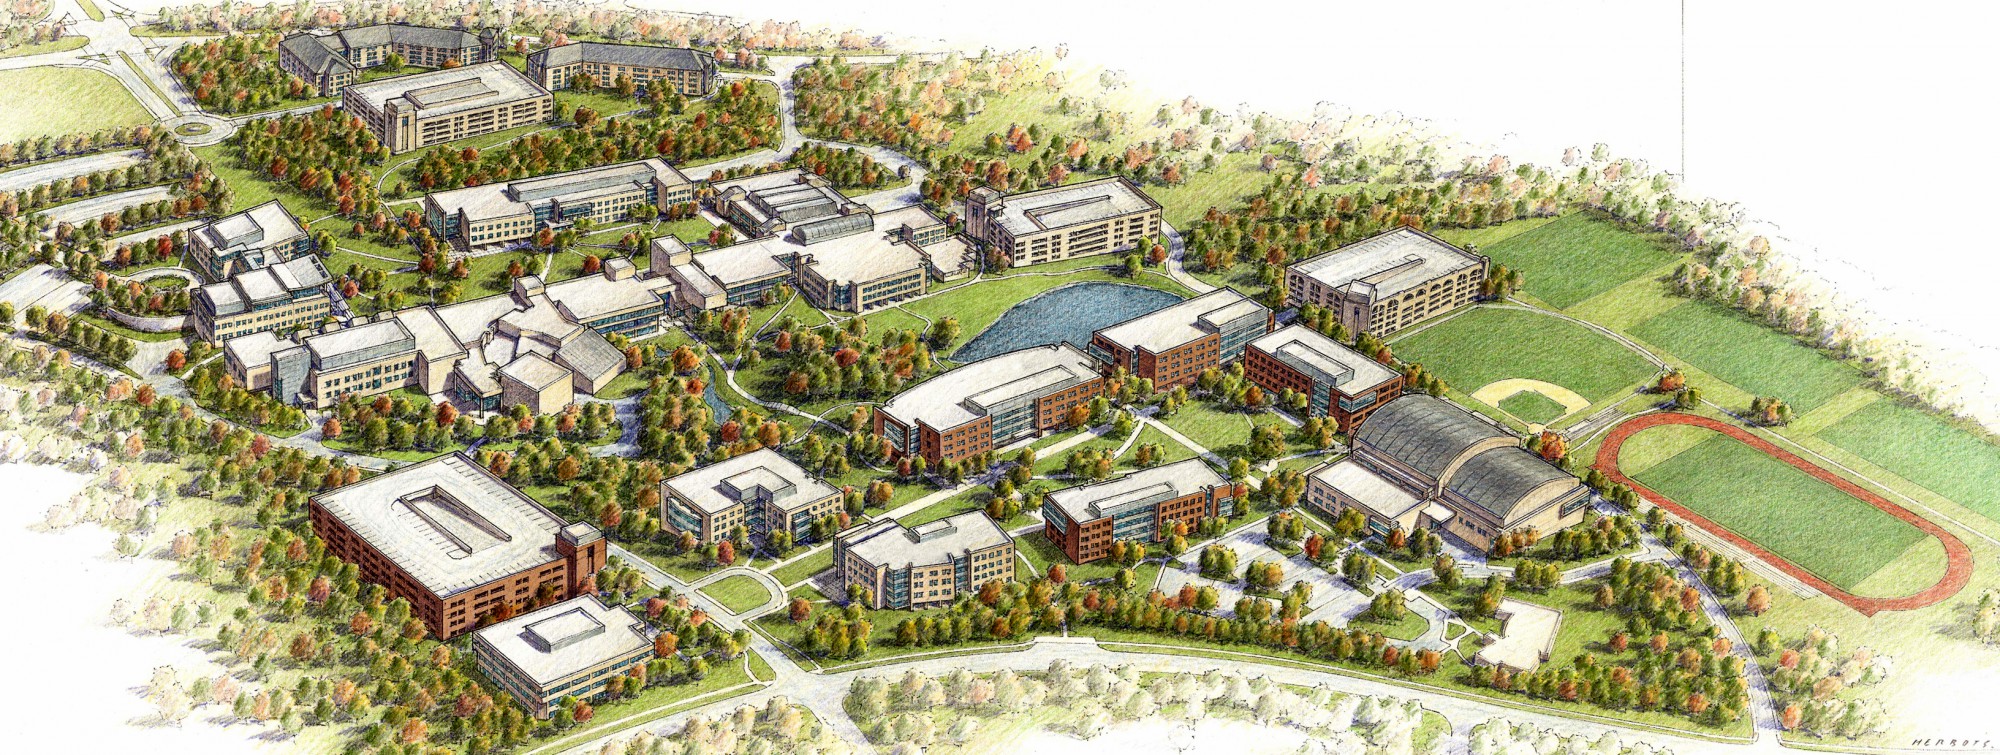 Howard Community College Campus Plan · Design Collective 3458